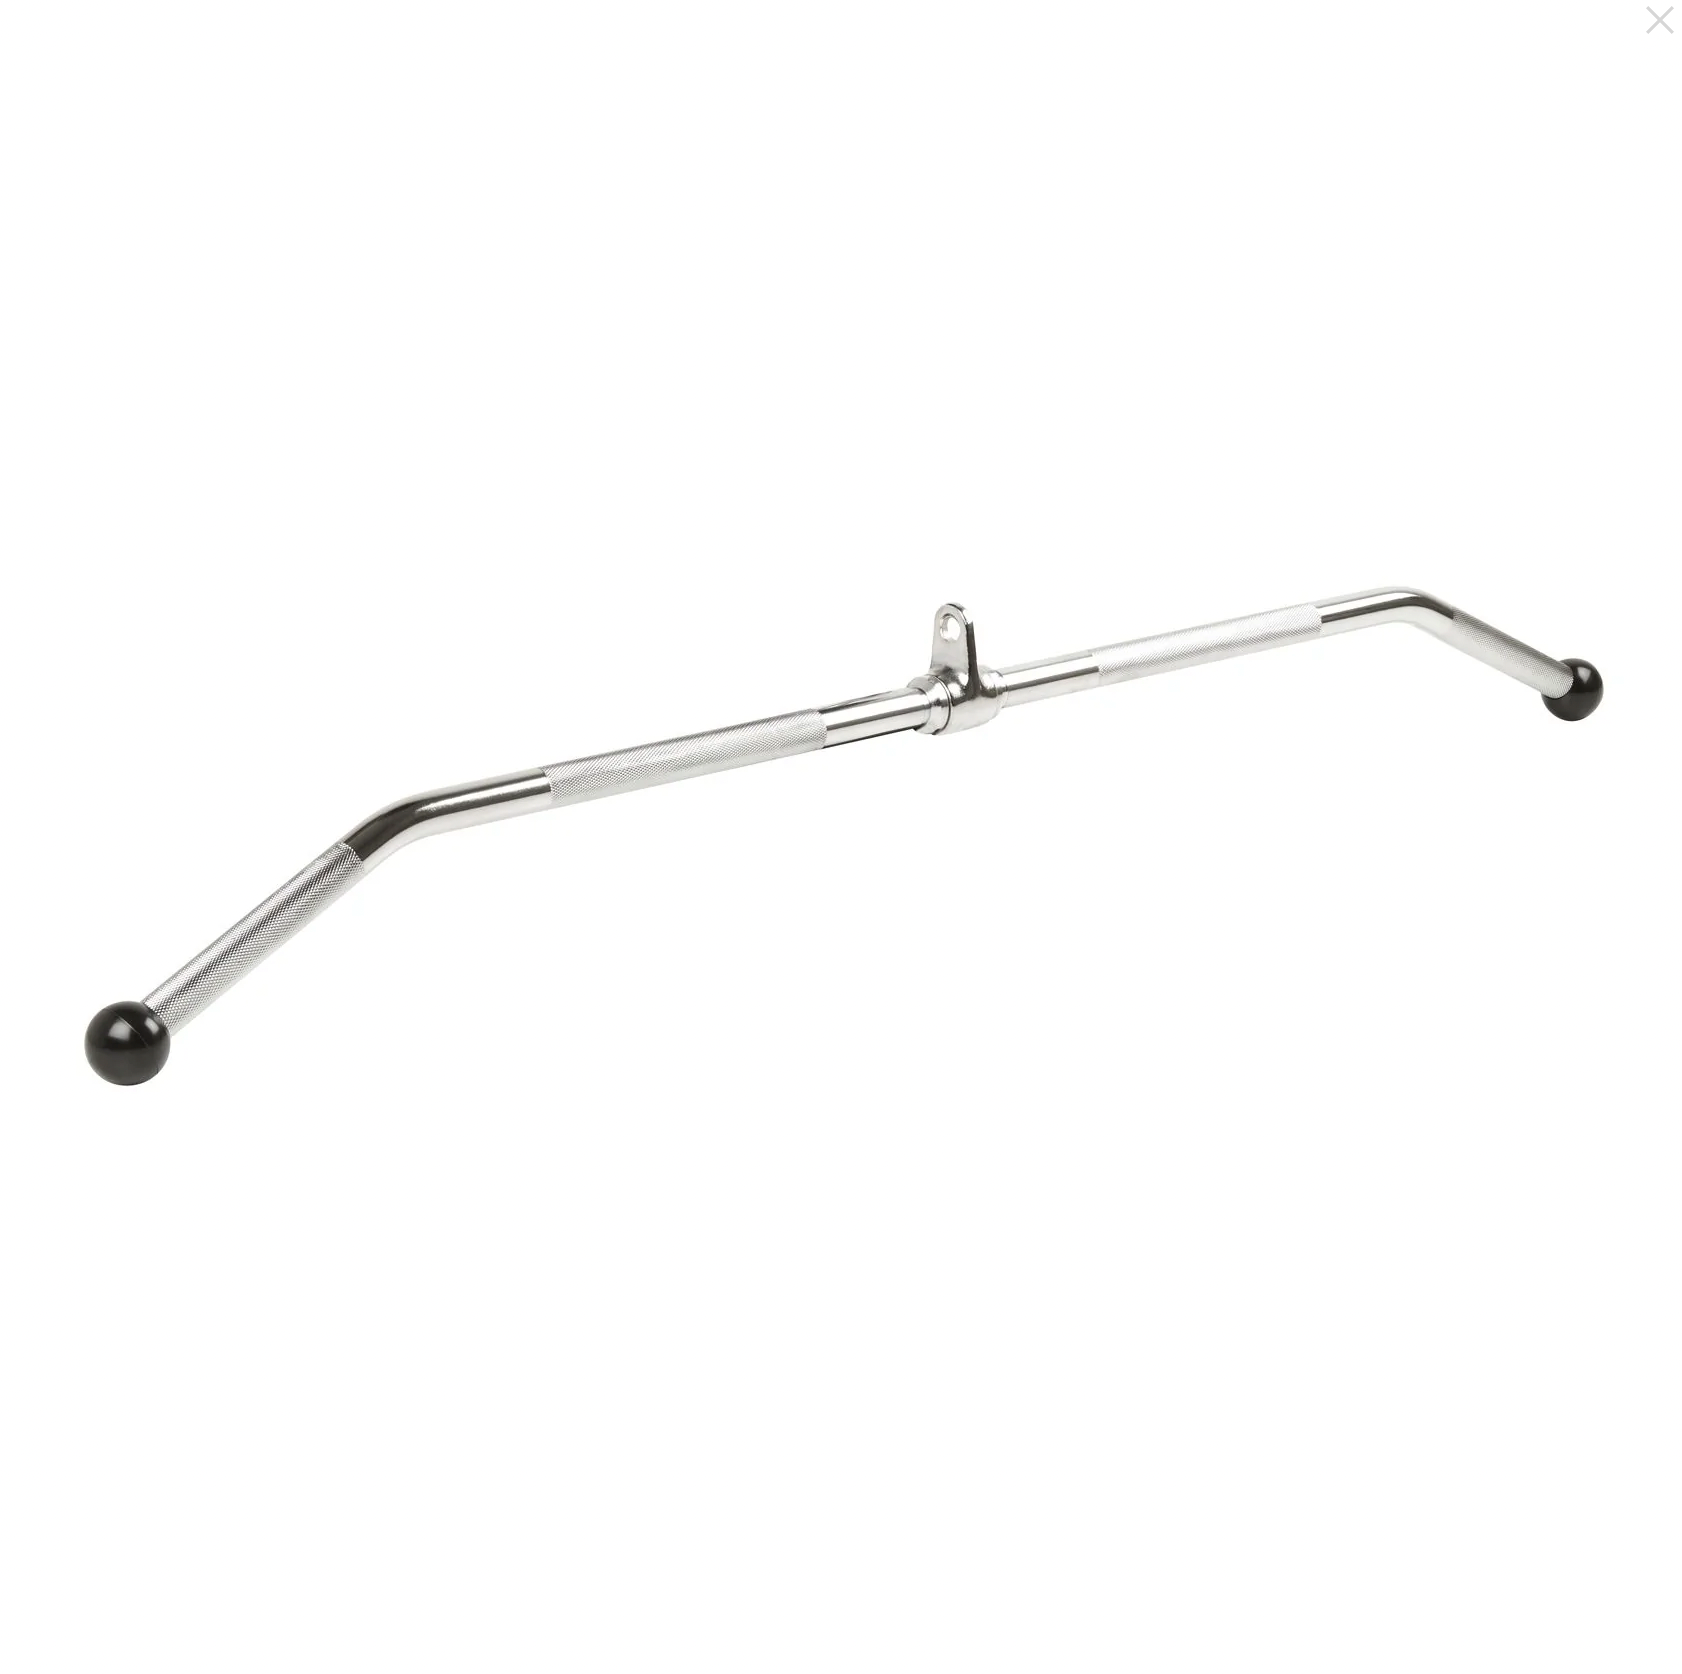 Lat Pulldown Bar 48" - Cable Attachment [120cm] - Fitness Hero Brand new